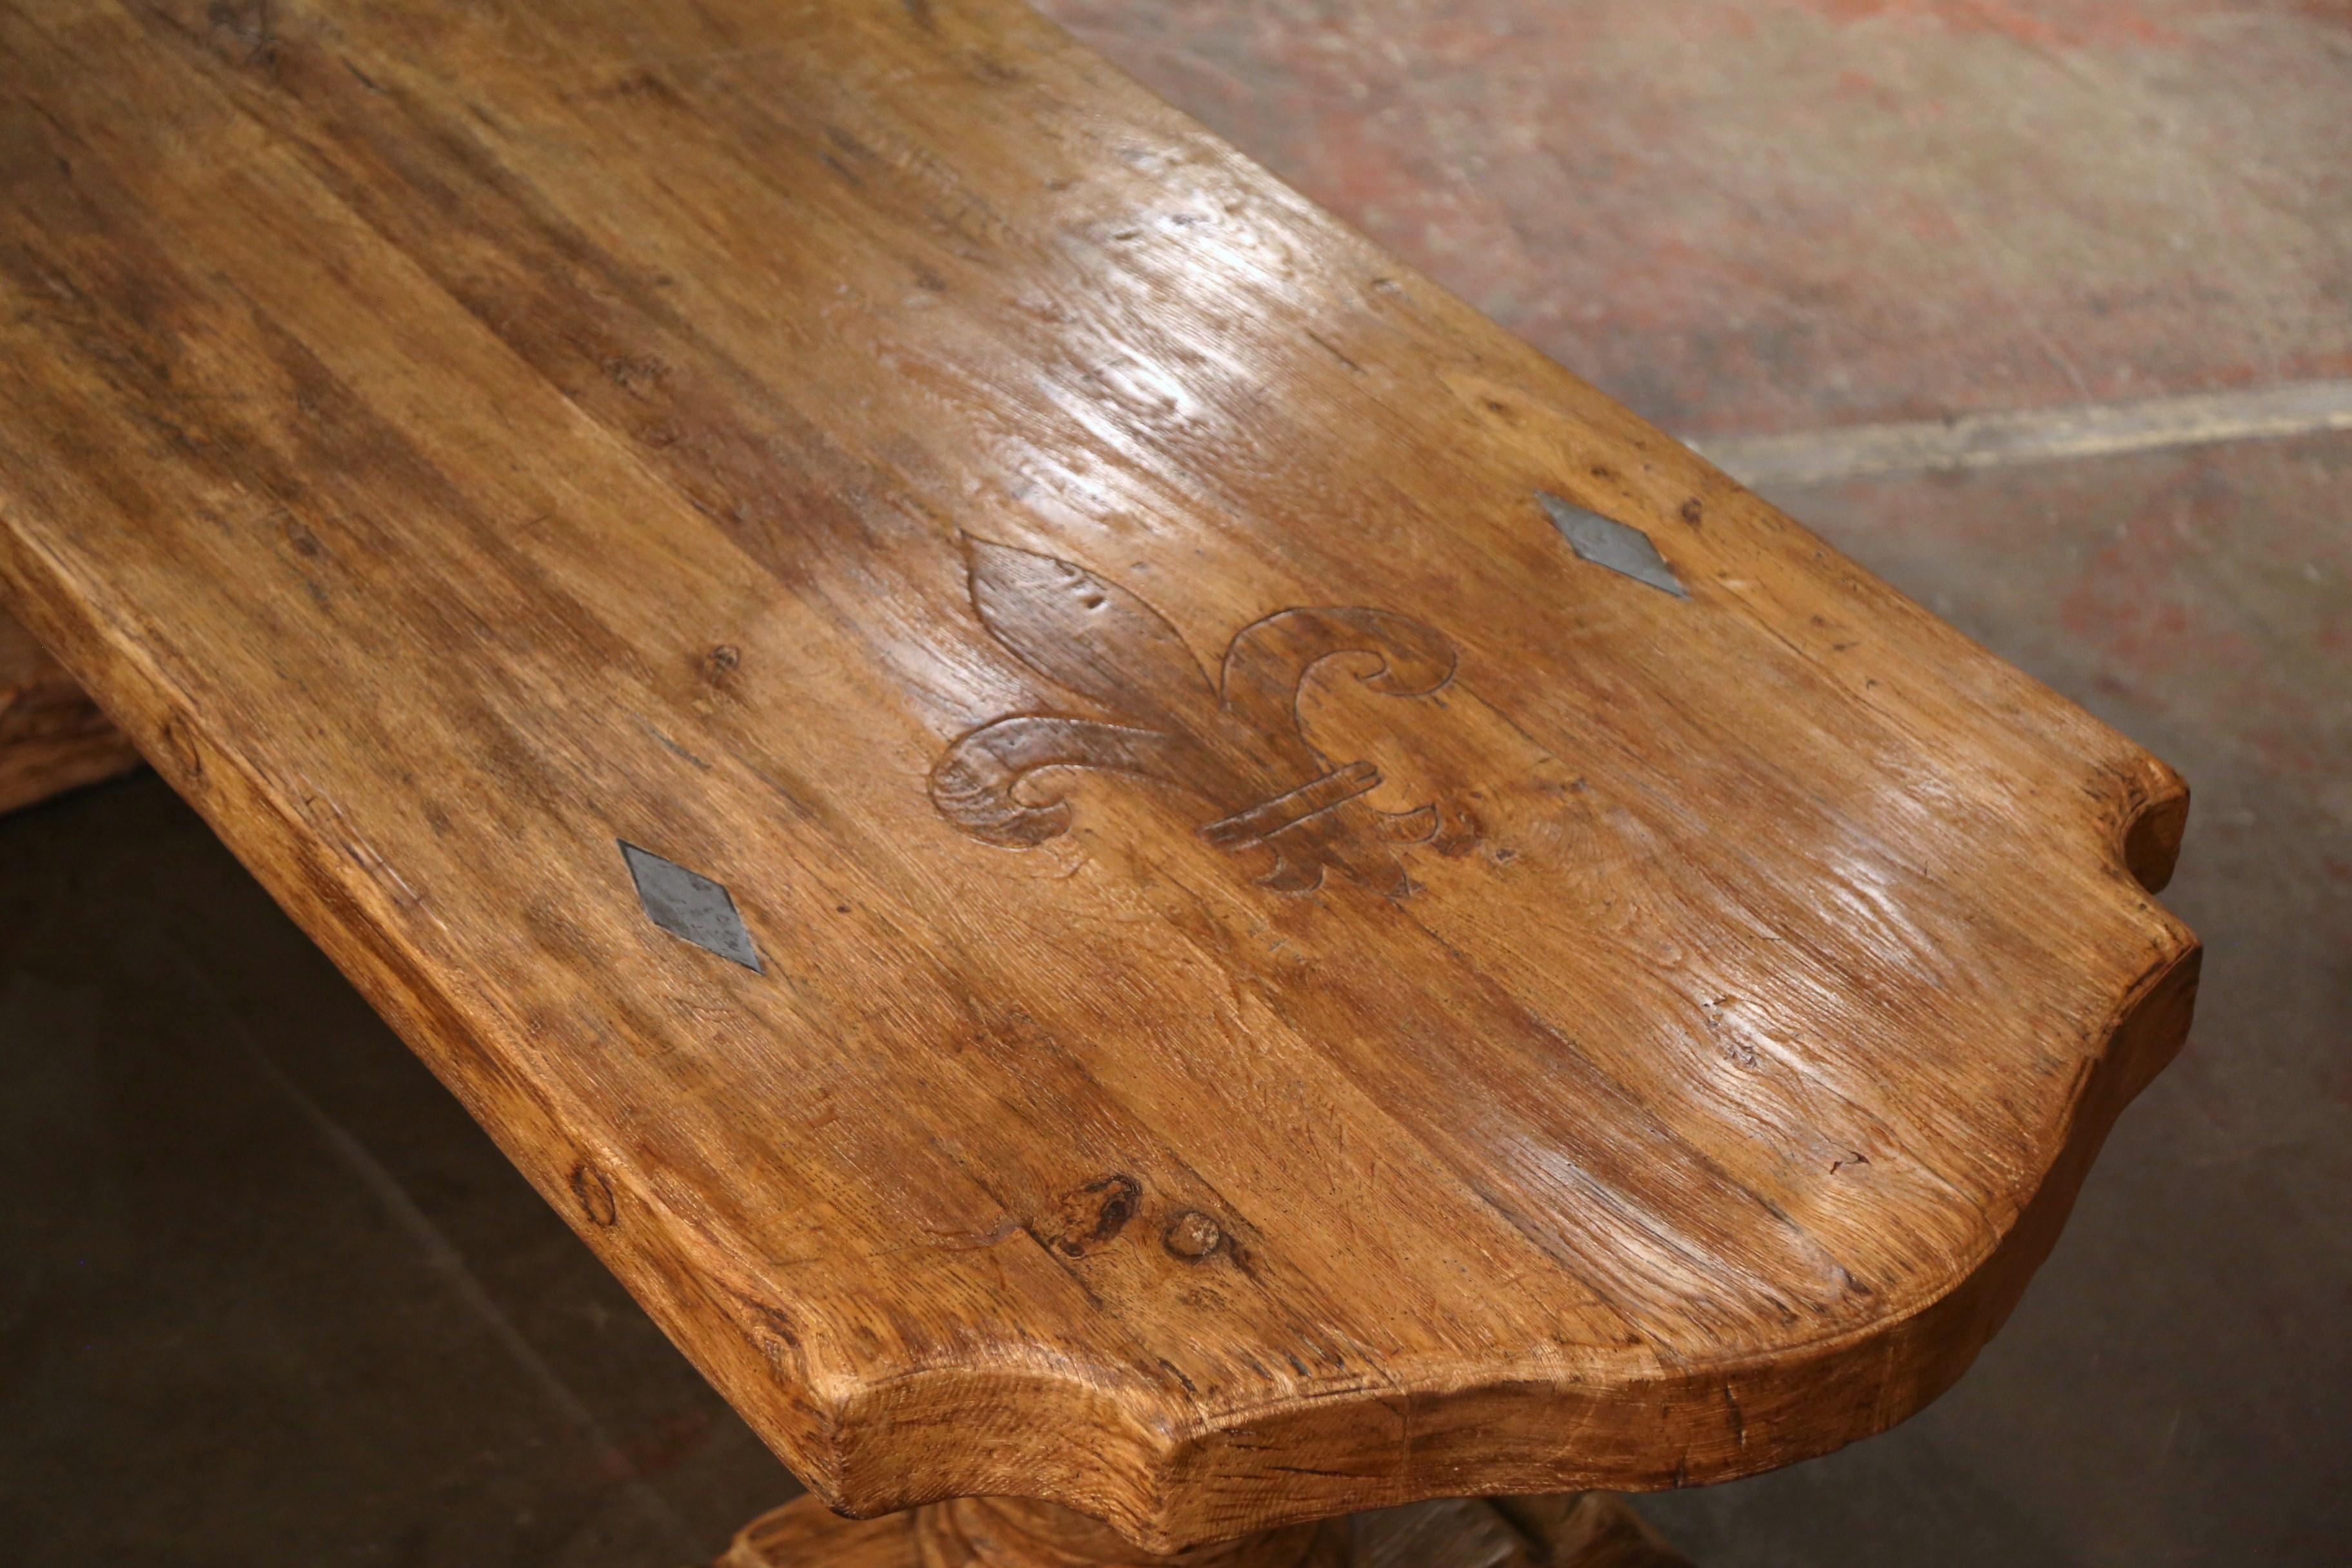 Early 20th Century French Carved Bleached Oak Farm Table with Fleur-de-Lis  For Sale 3